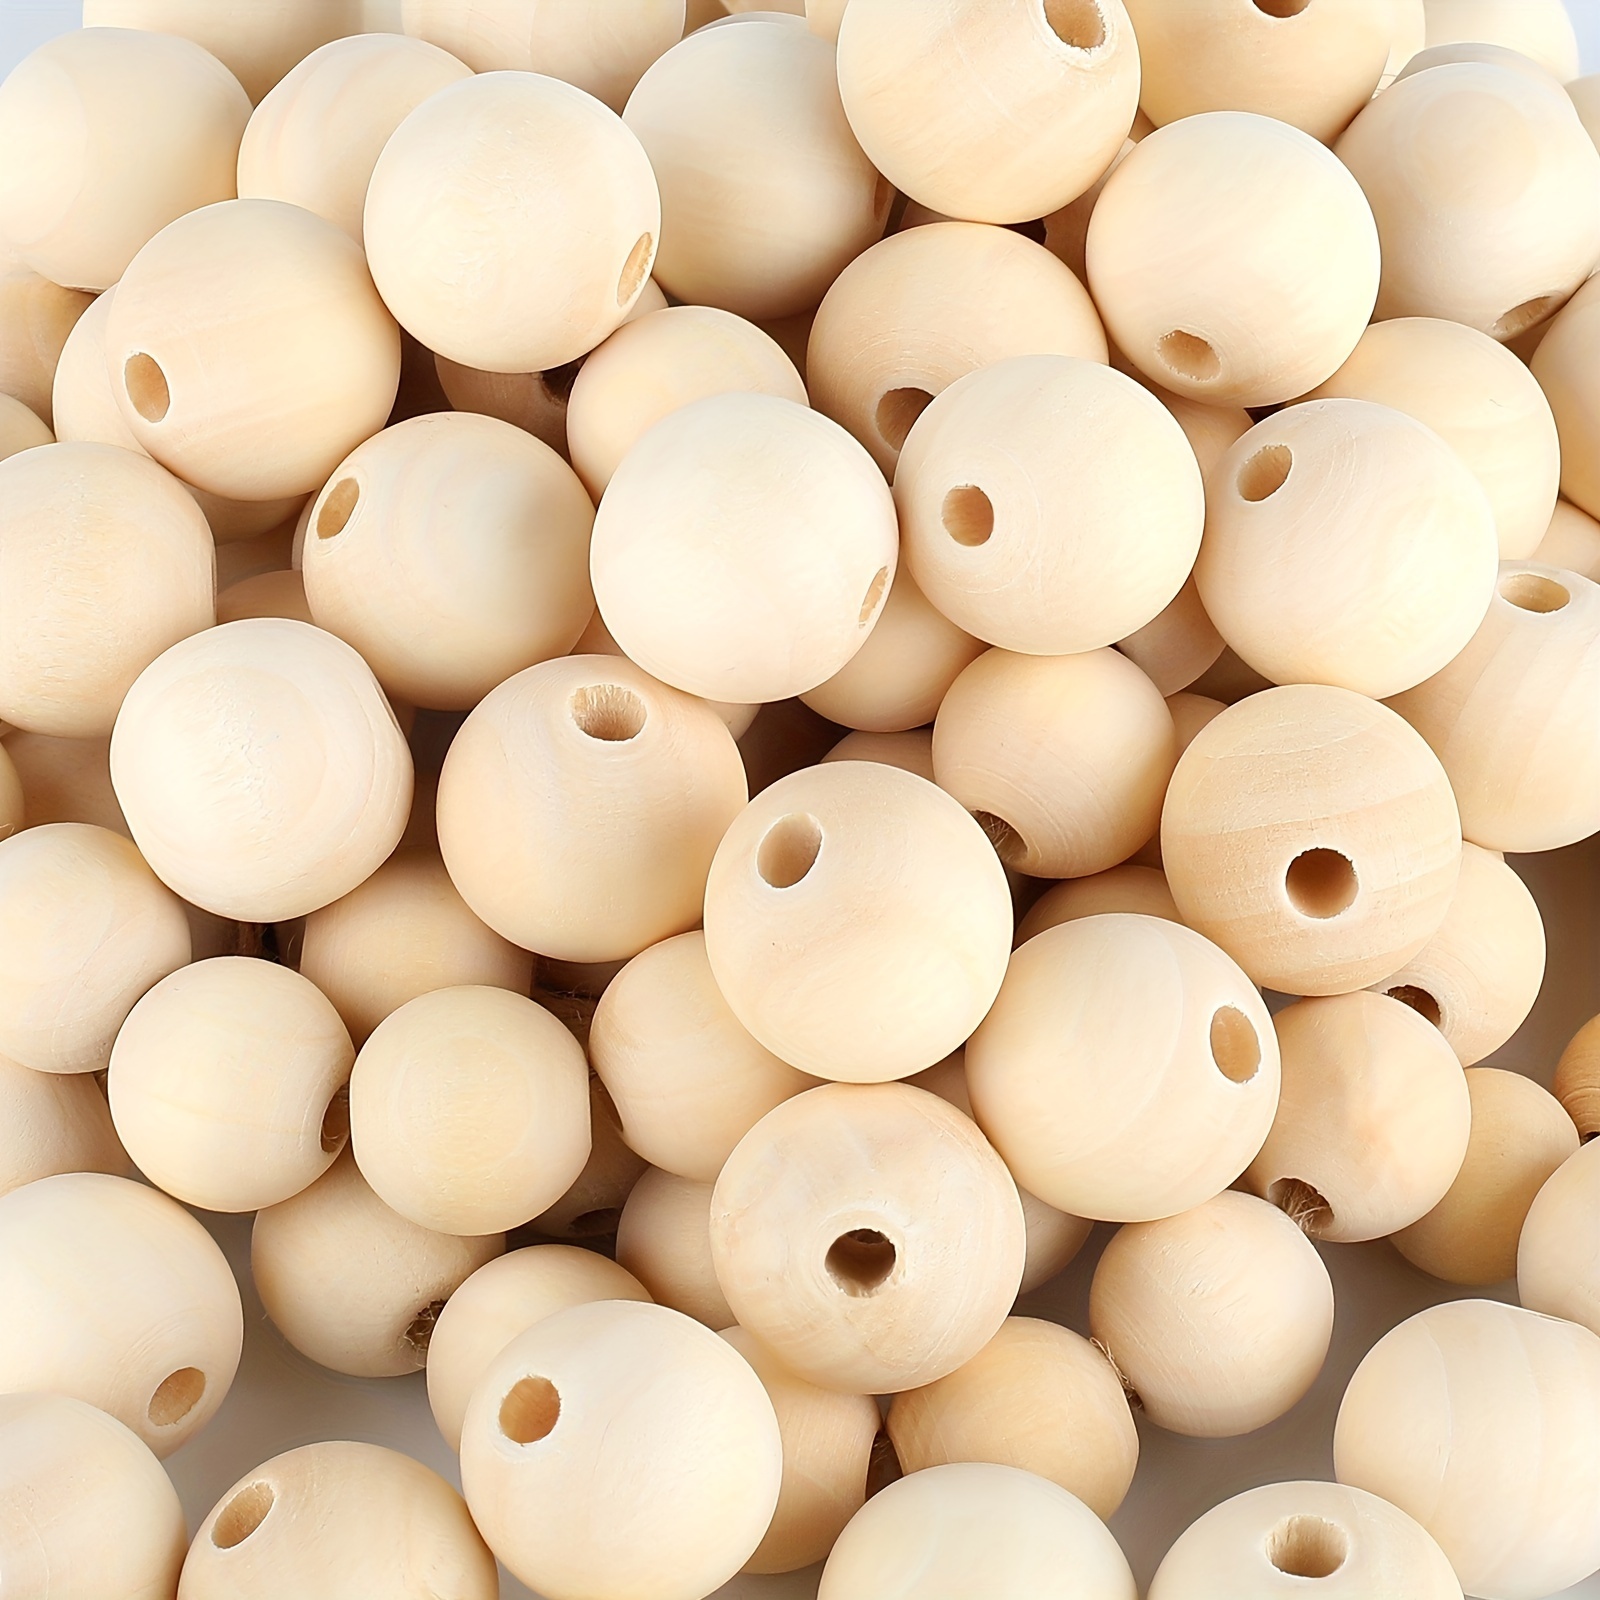 

50pcs 20mm Wooden Beads, Beige White Color Round Beads For Diy Crafts, Home Decor, And Party Decorations